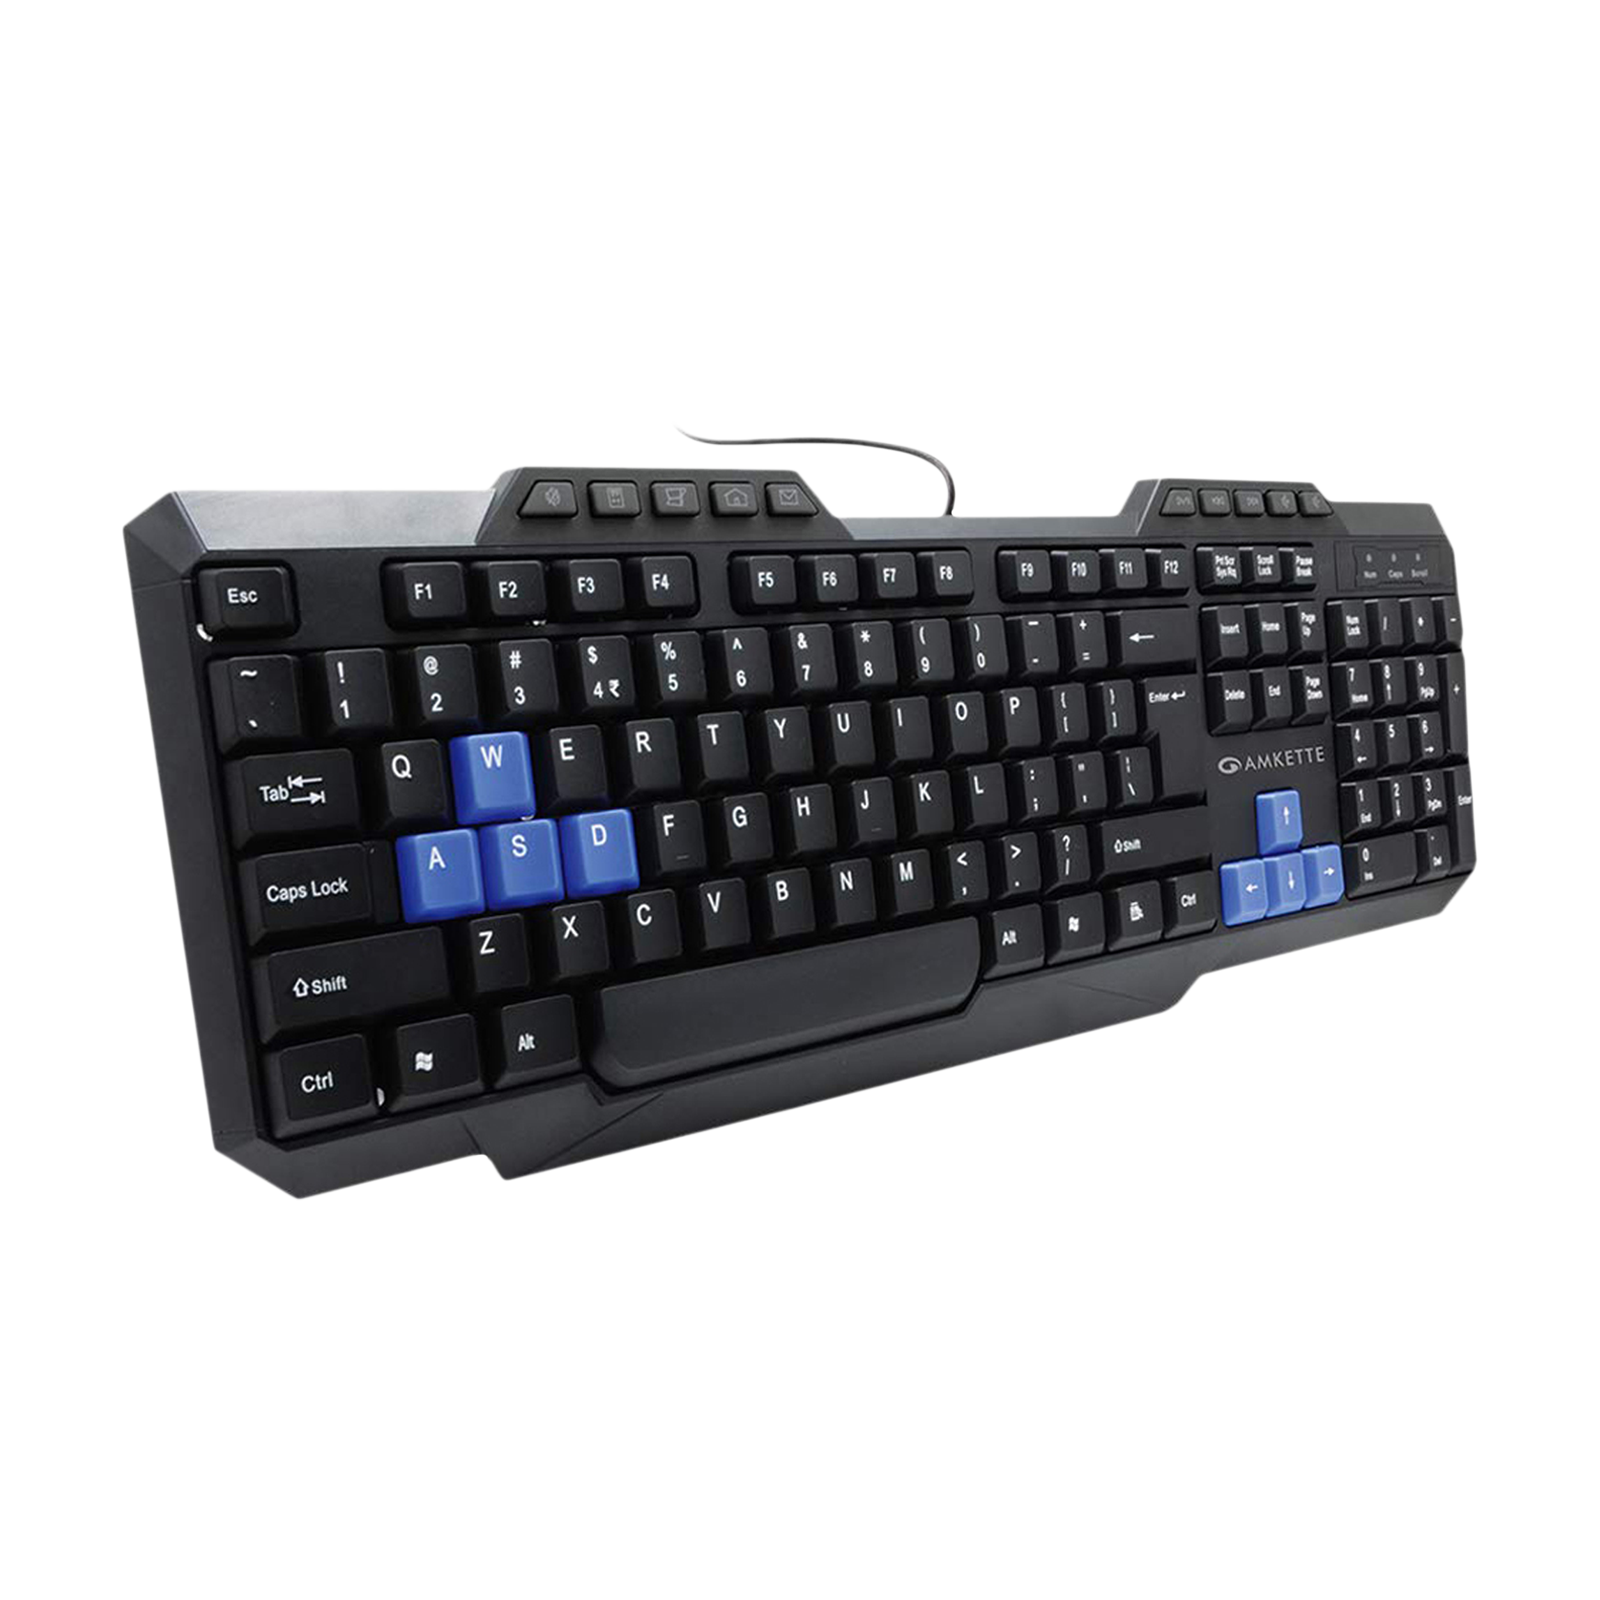 Amkette Xcite Neo Wired Keyboard & Mouse Combo (1000 DPI, Spill Resistant, Black)_3